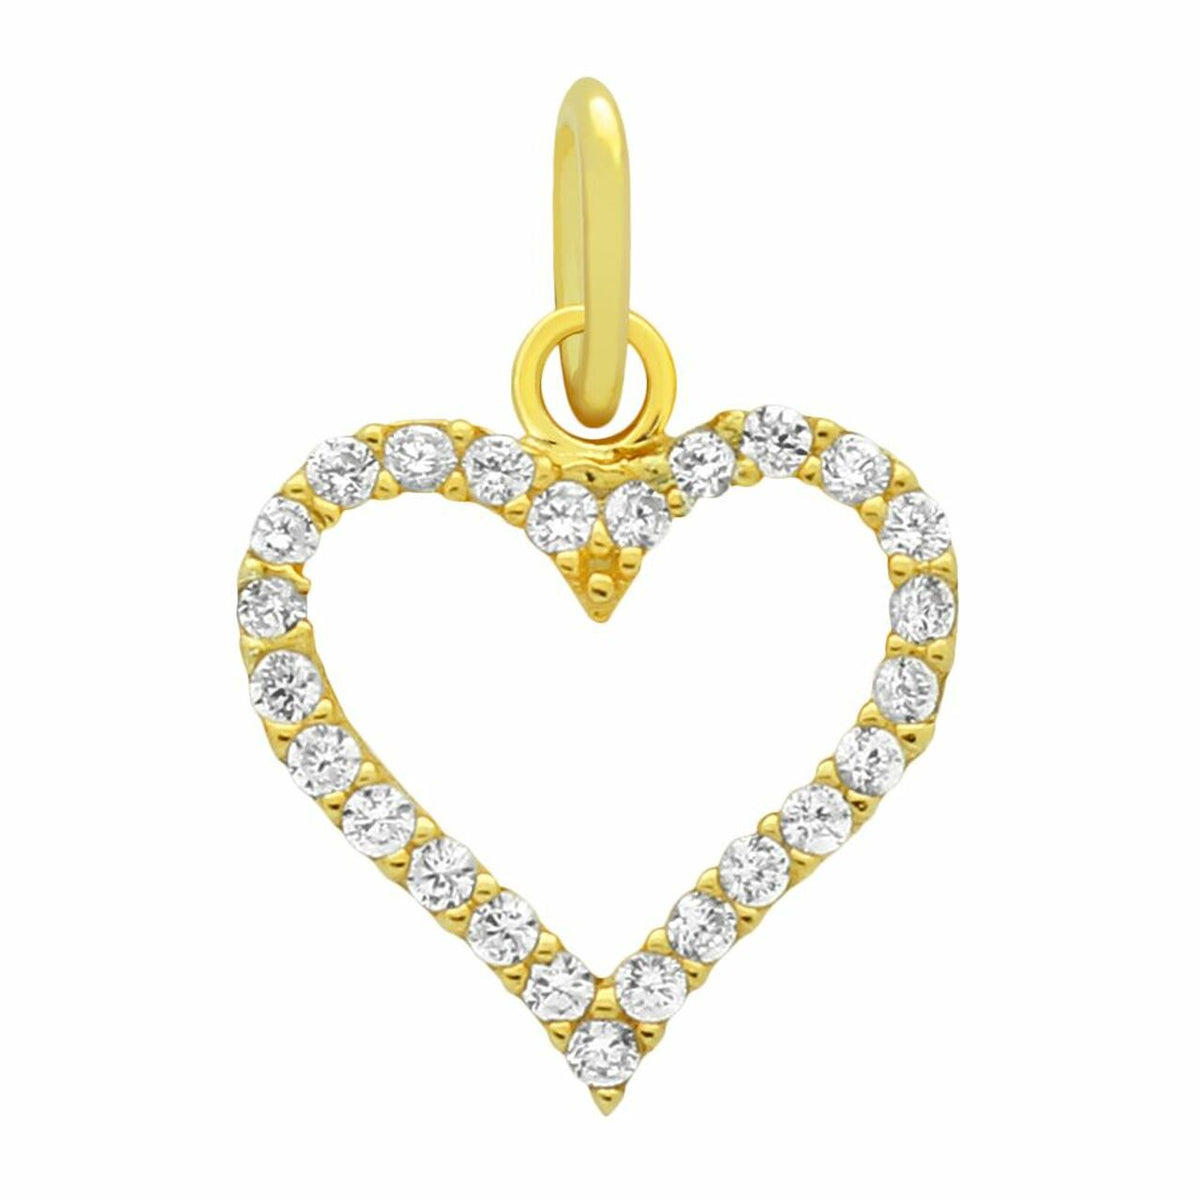 Silver CZ Heart Outline Charm